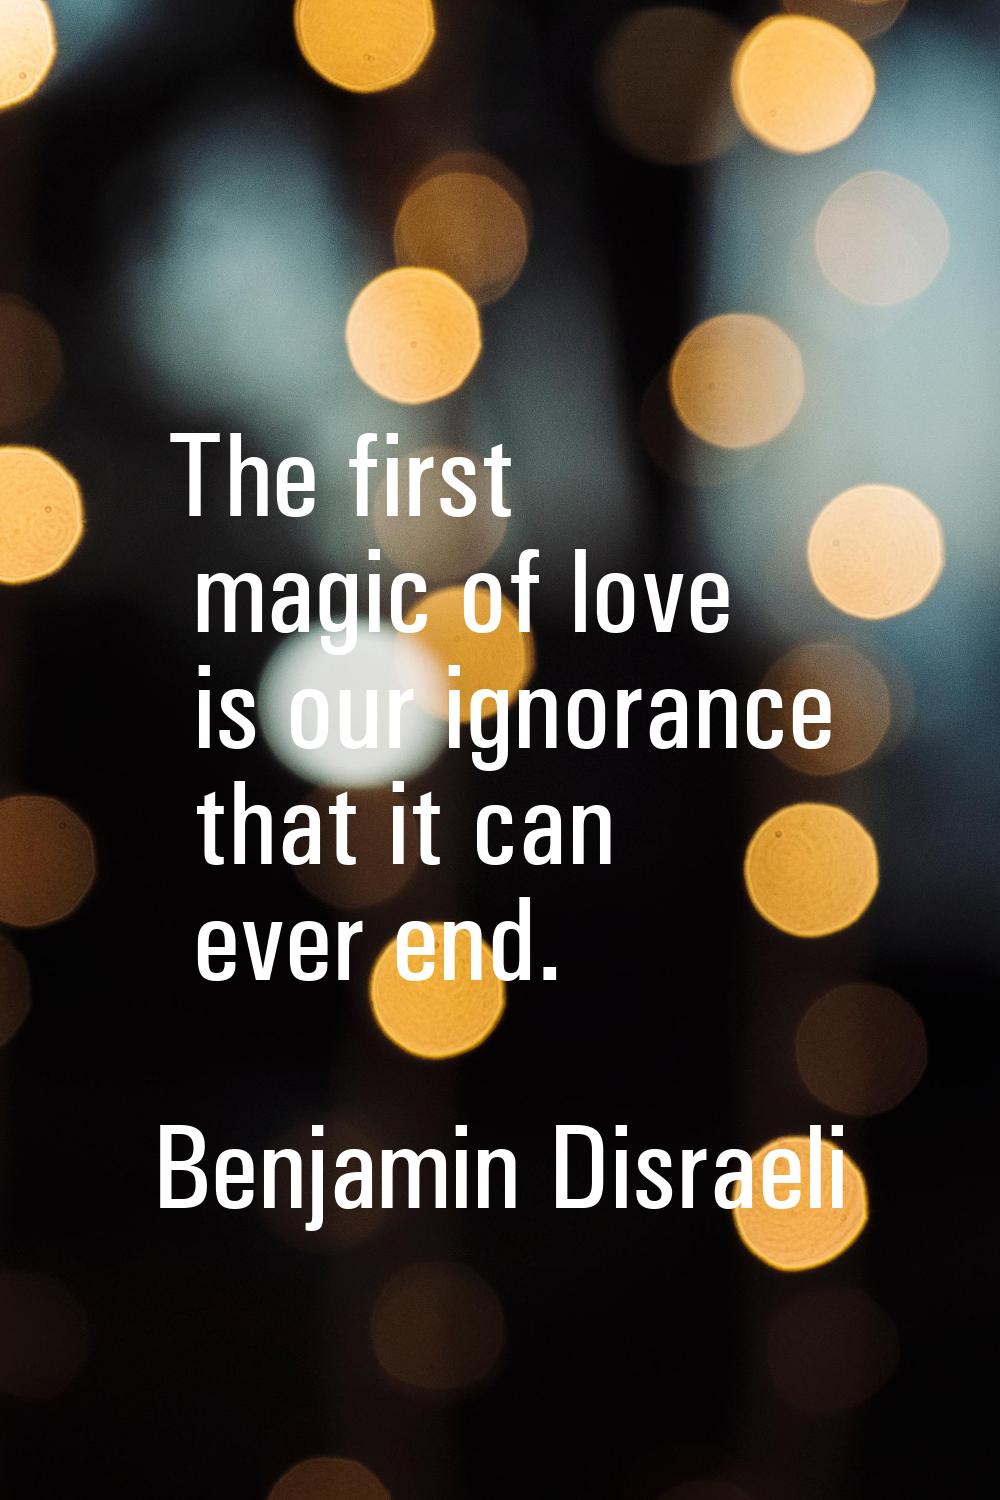 The first magic of love is our ignorance that it can ever end.